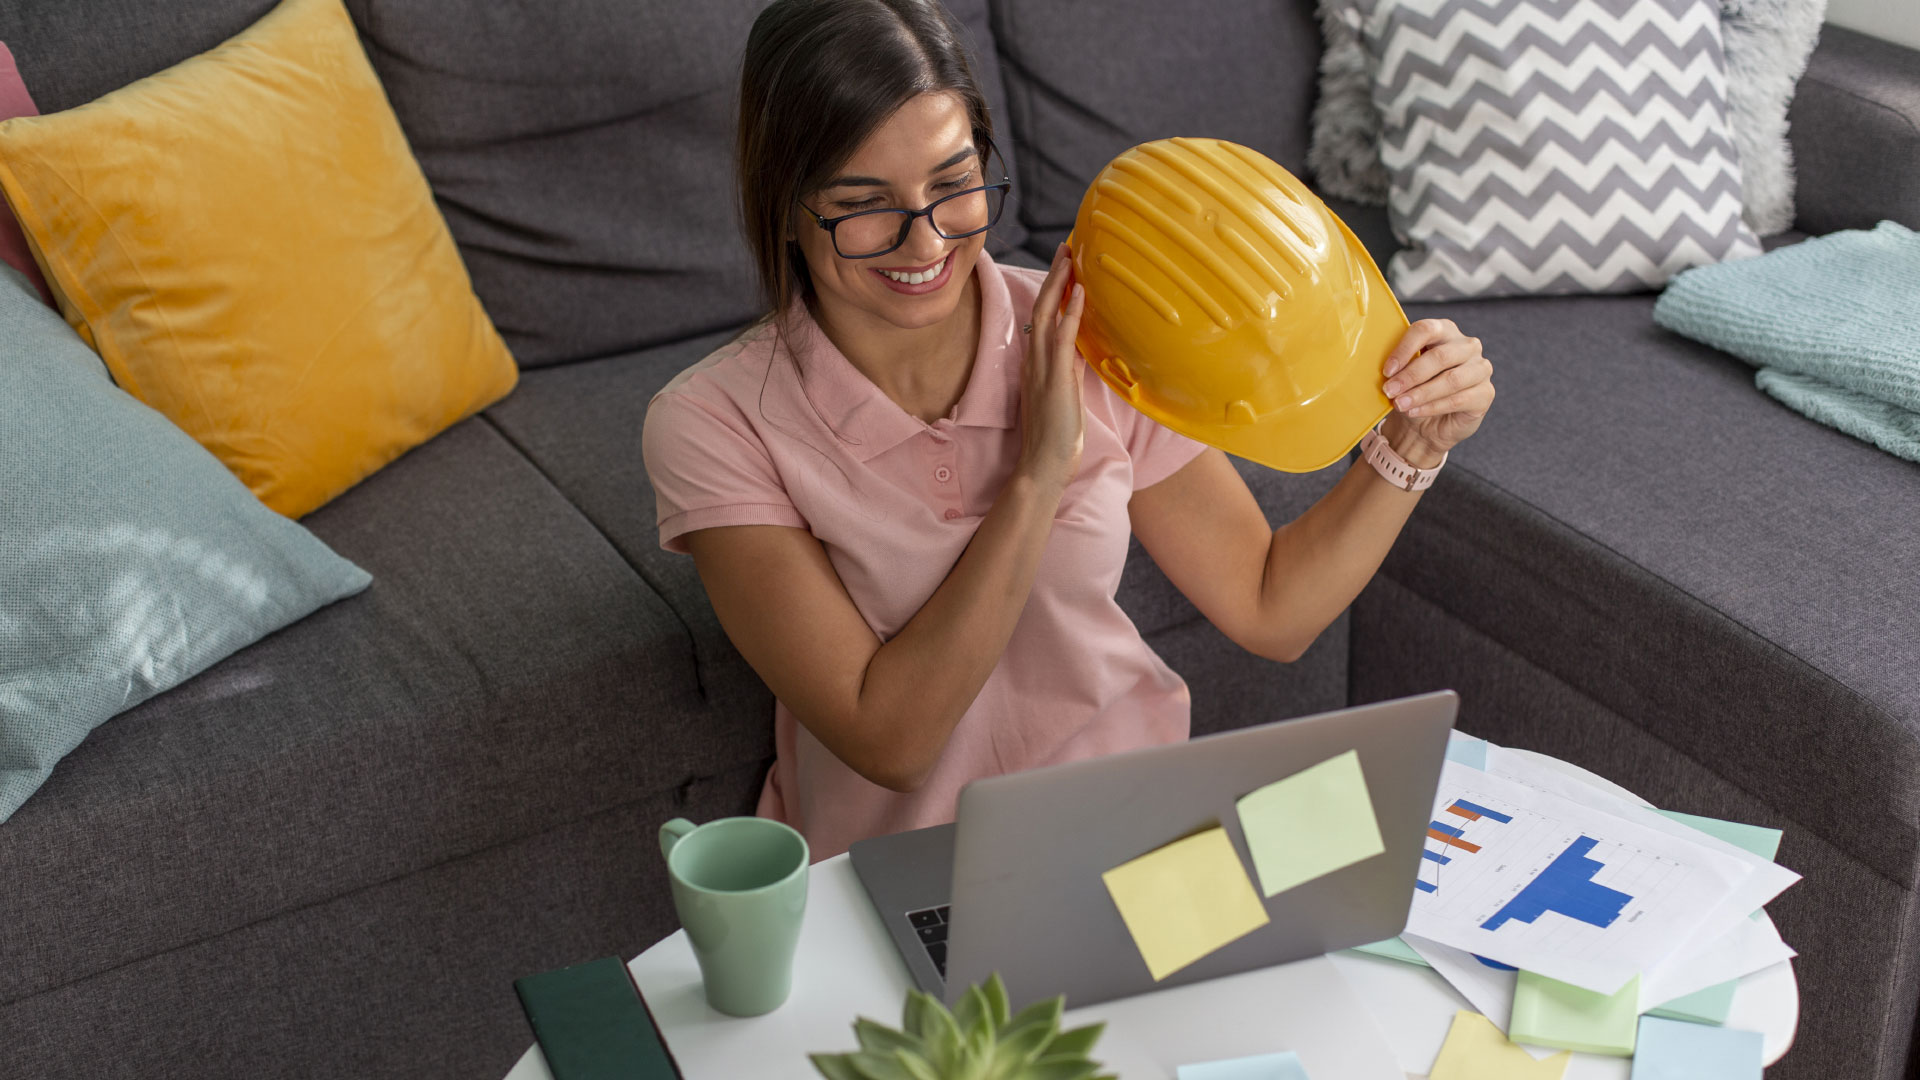 Why Women Should Consider a Job in Construction